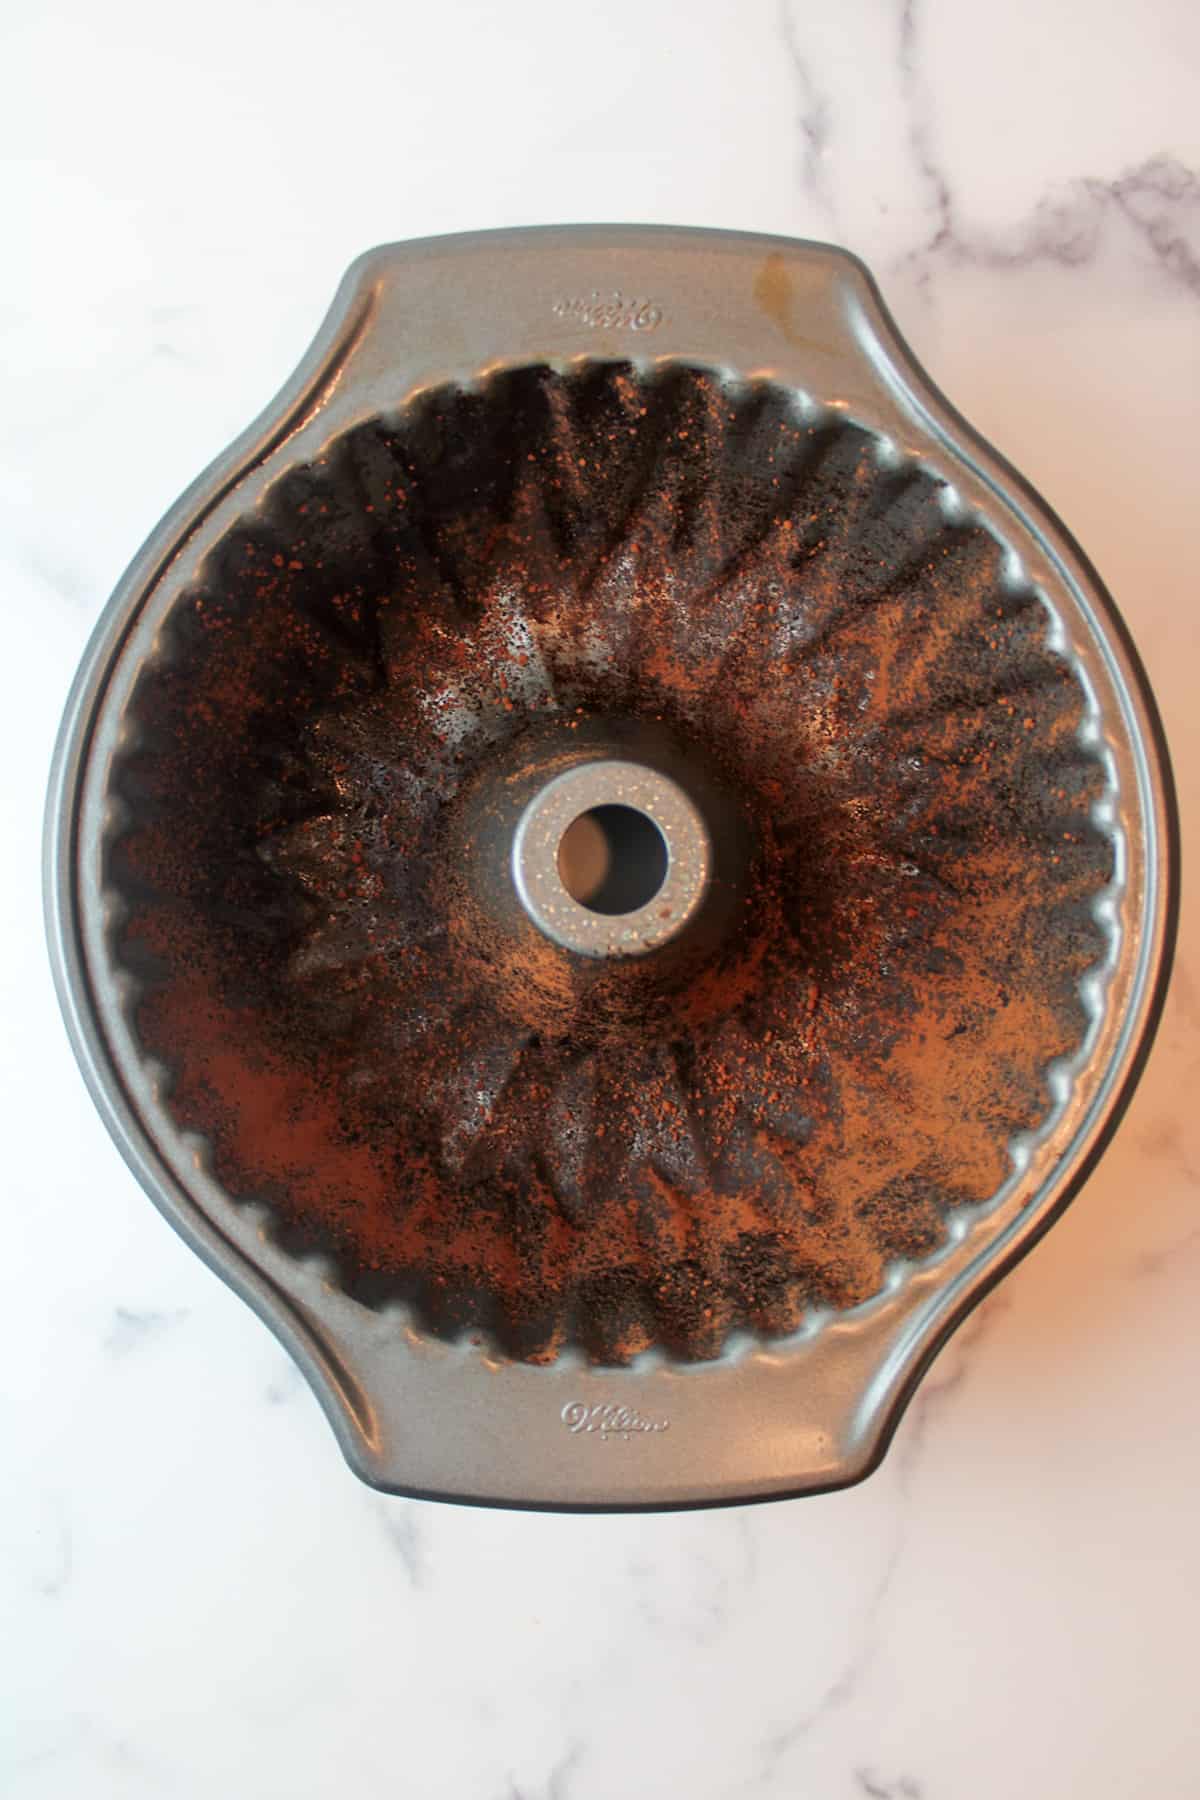 cocoa powder dusted bundt pan